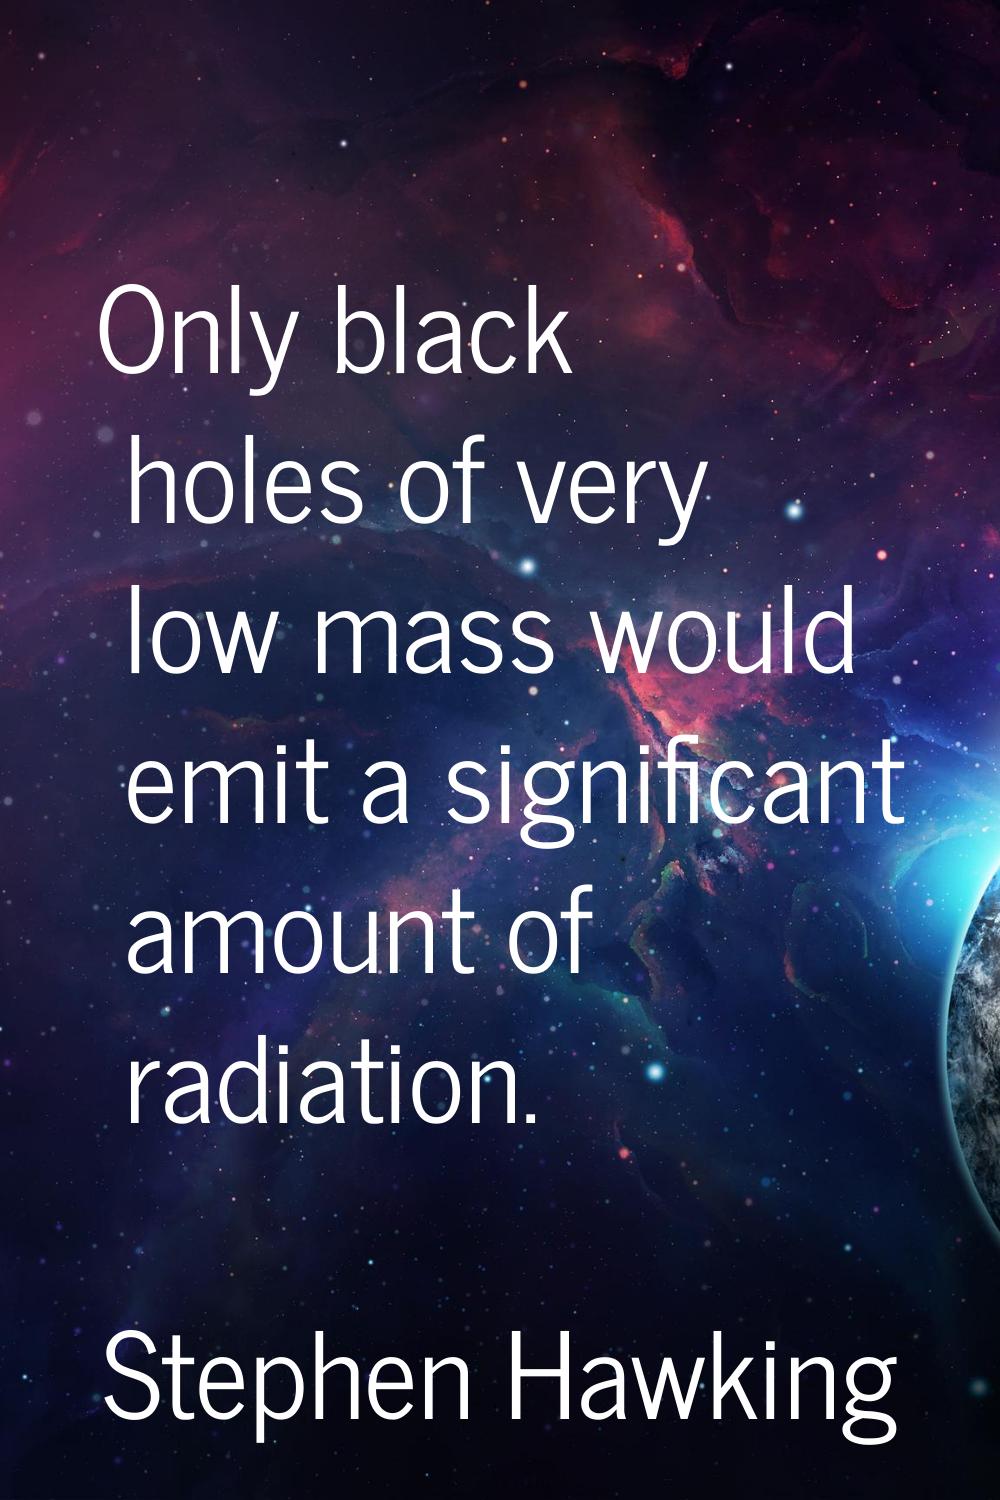 Only black holes of very low mass would emit a significant amount of radiation.